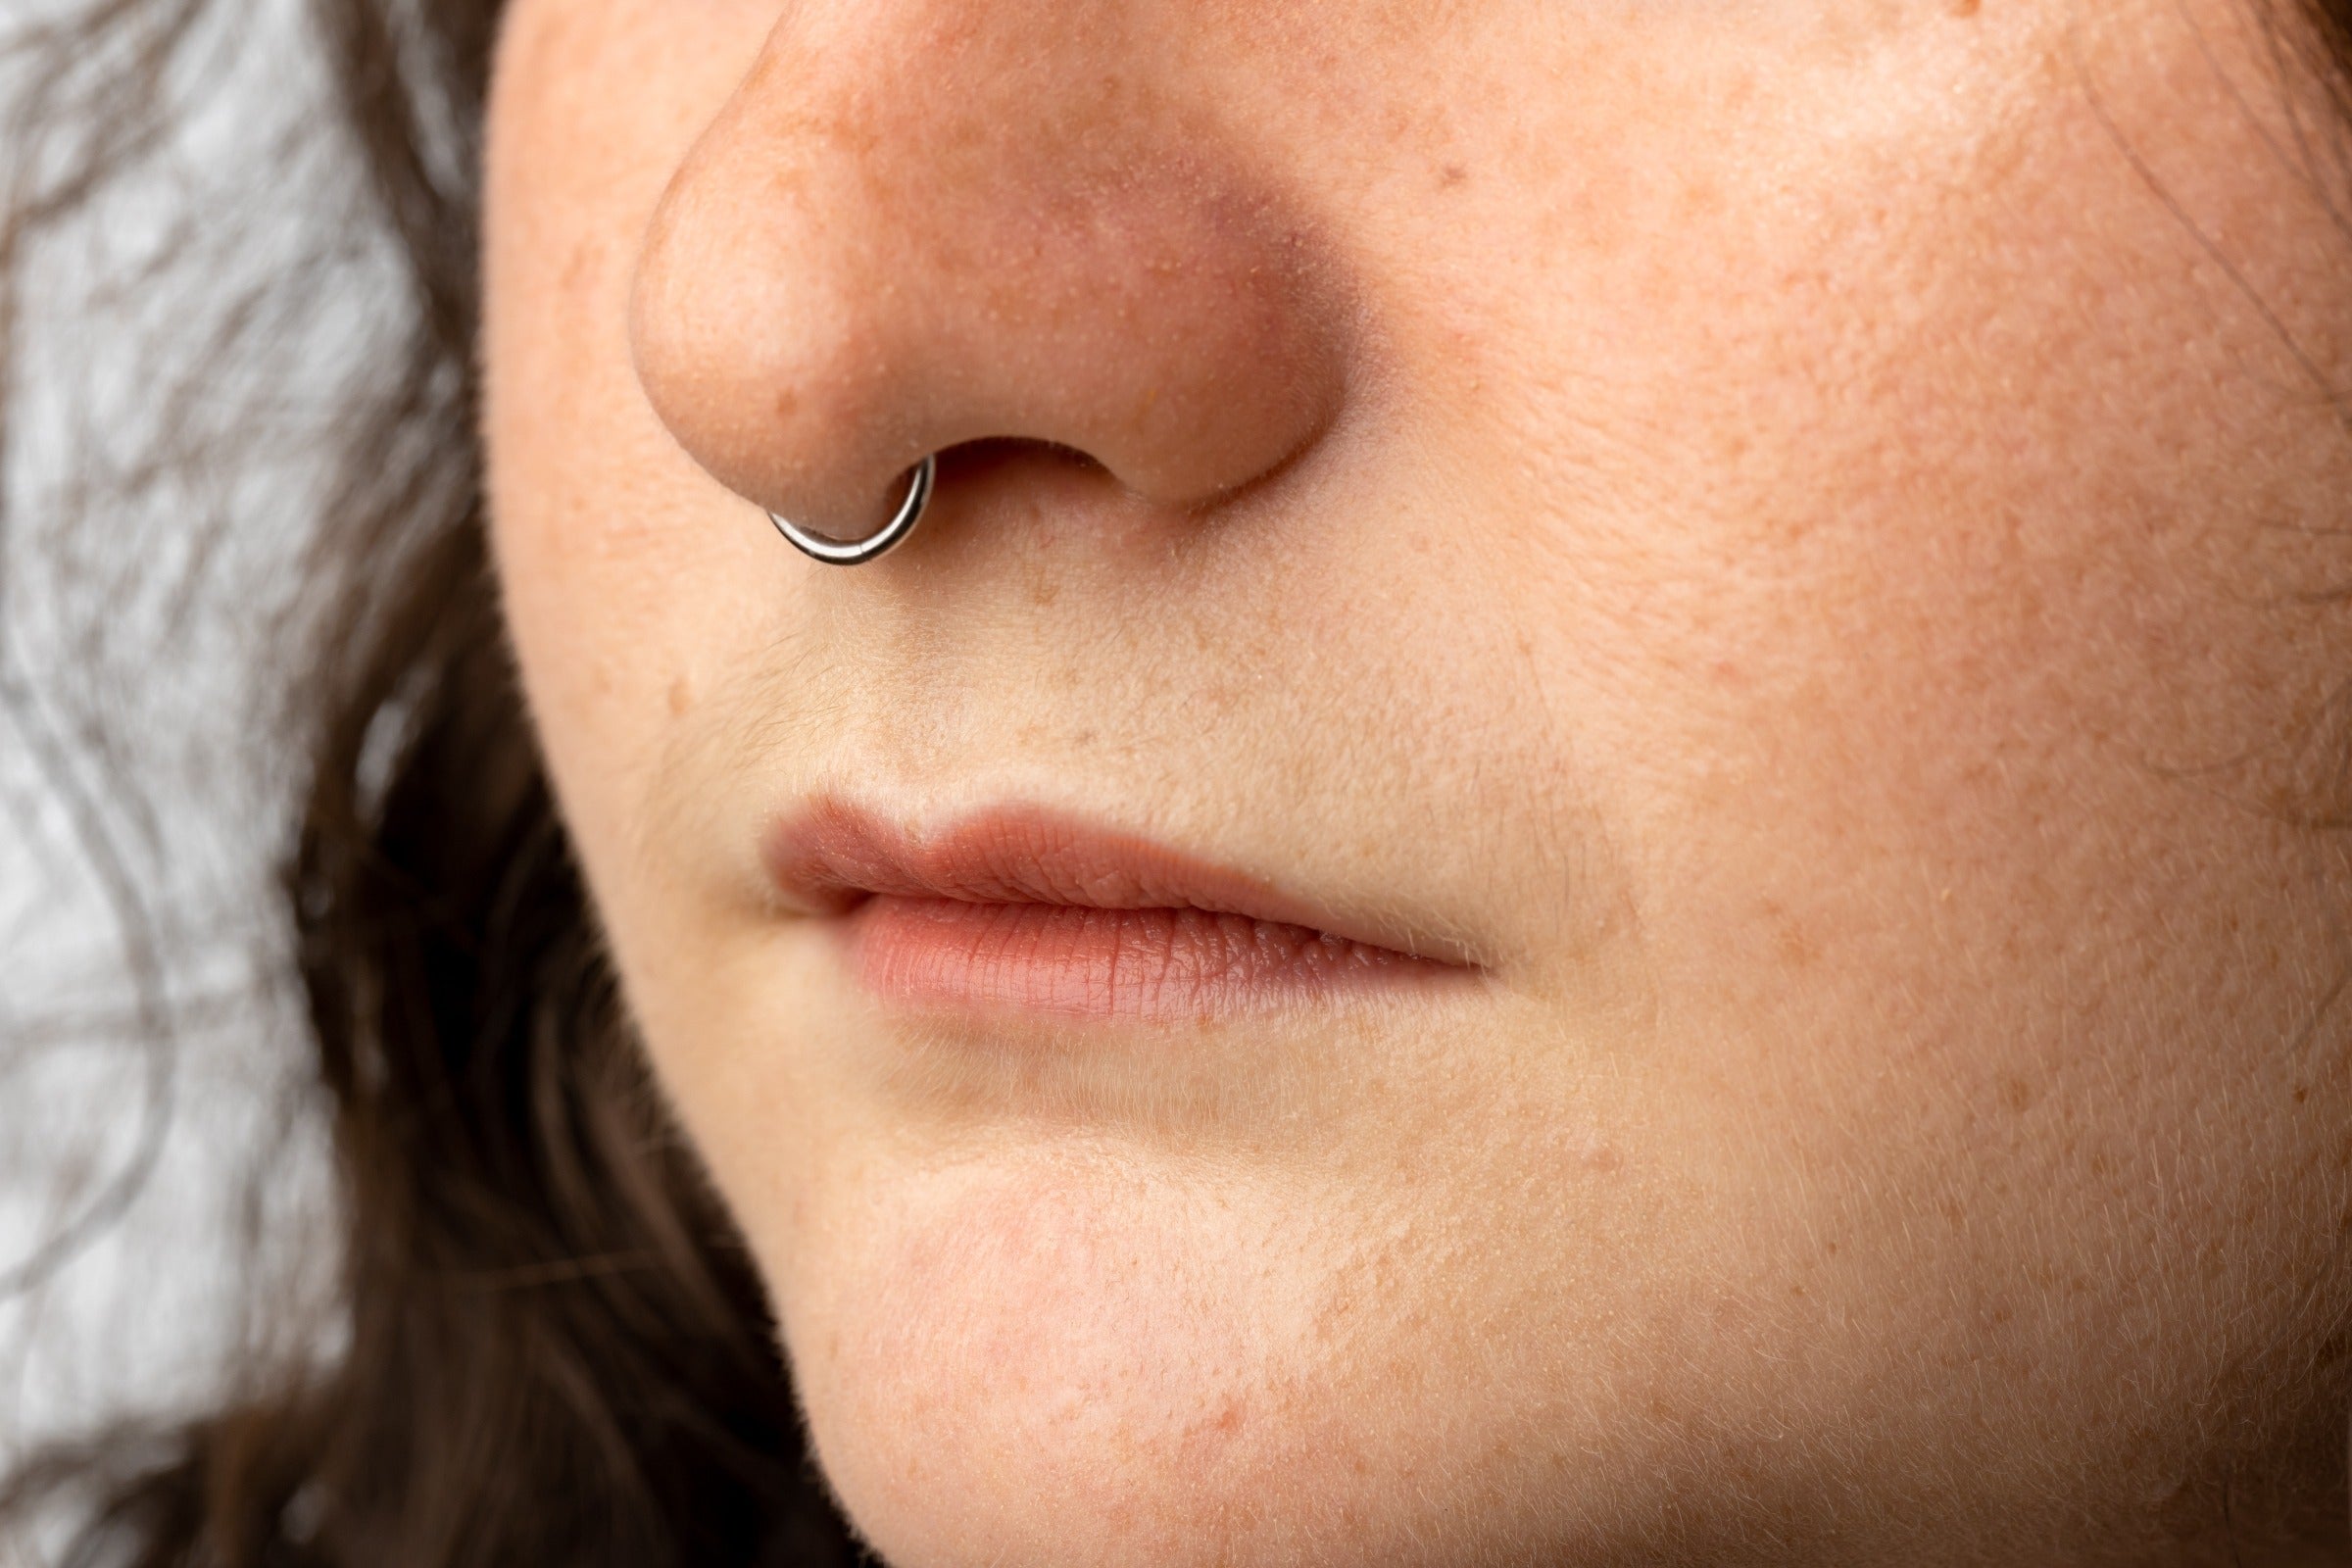 3 types of piercings that are most socially acceptable